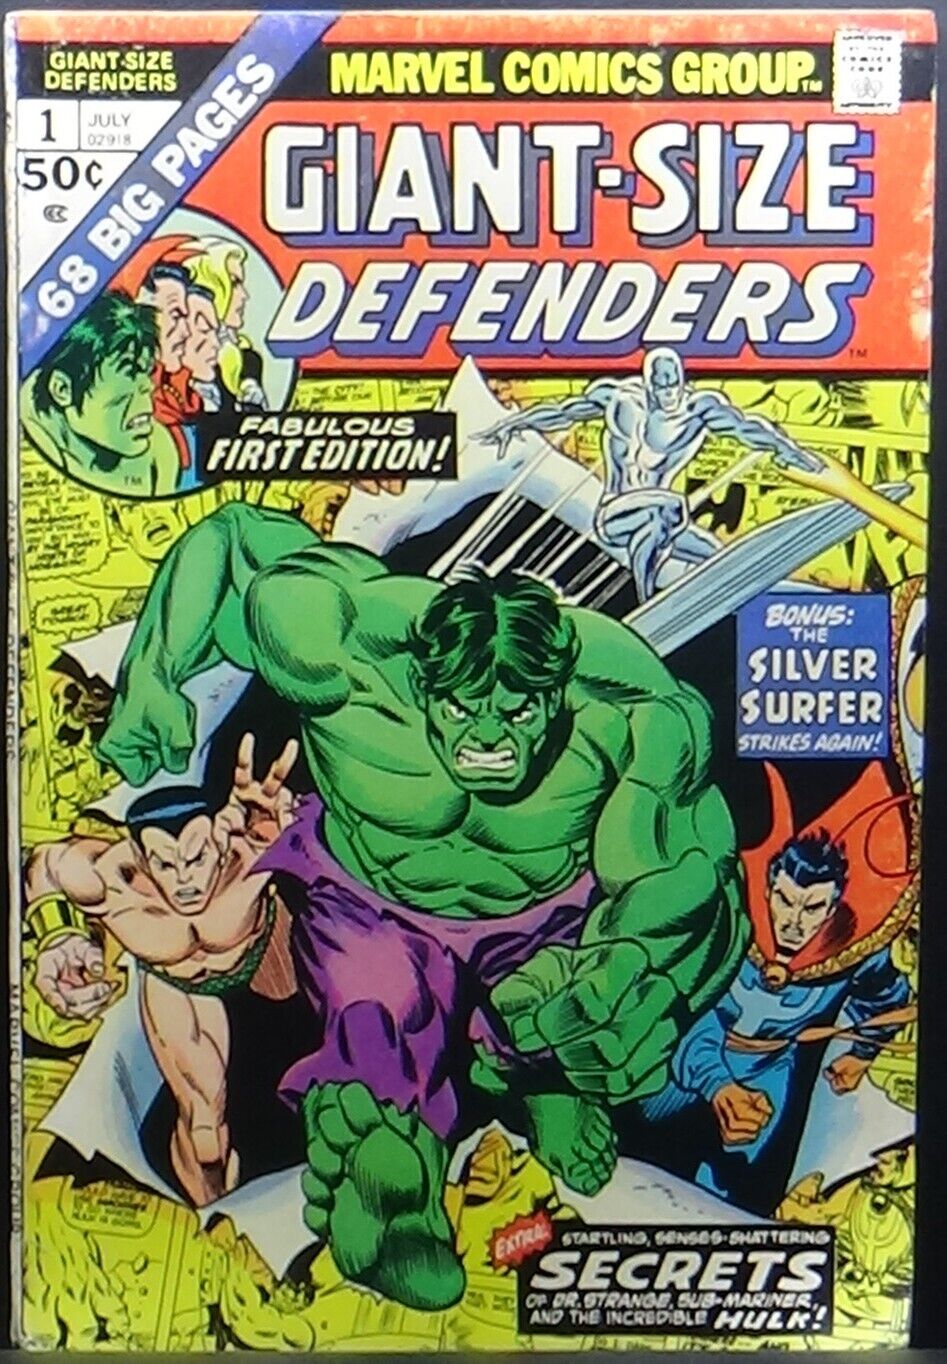 GIANT SIZE DEFENDERS #1 1974 7.0 F/VF FIRST GIANT SIZE ORIGIN STORIES 